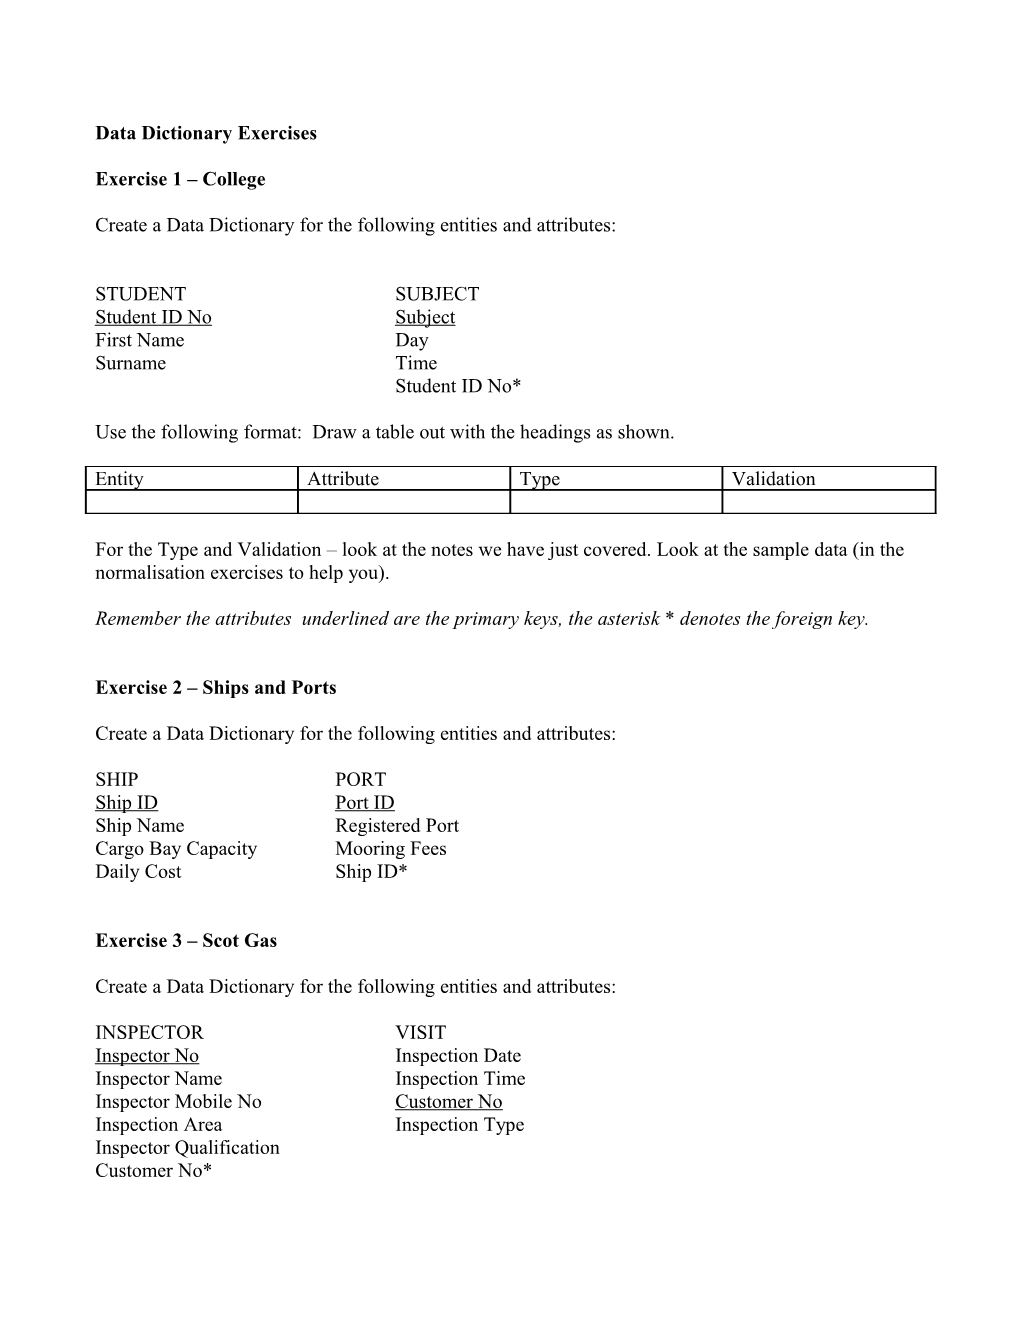 Data Dictionary Exercise 1 College